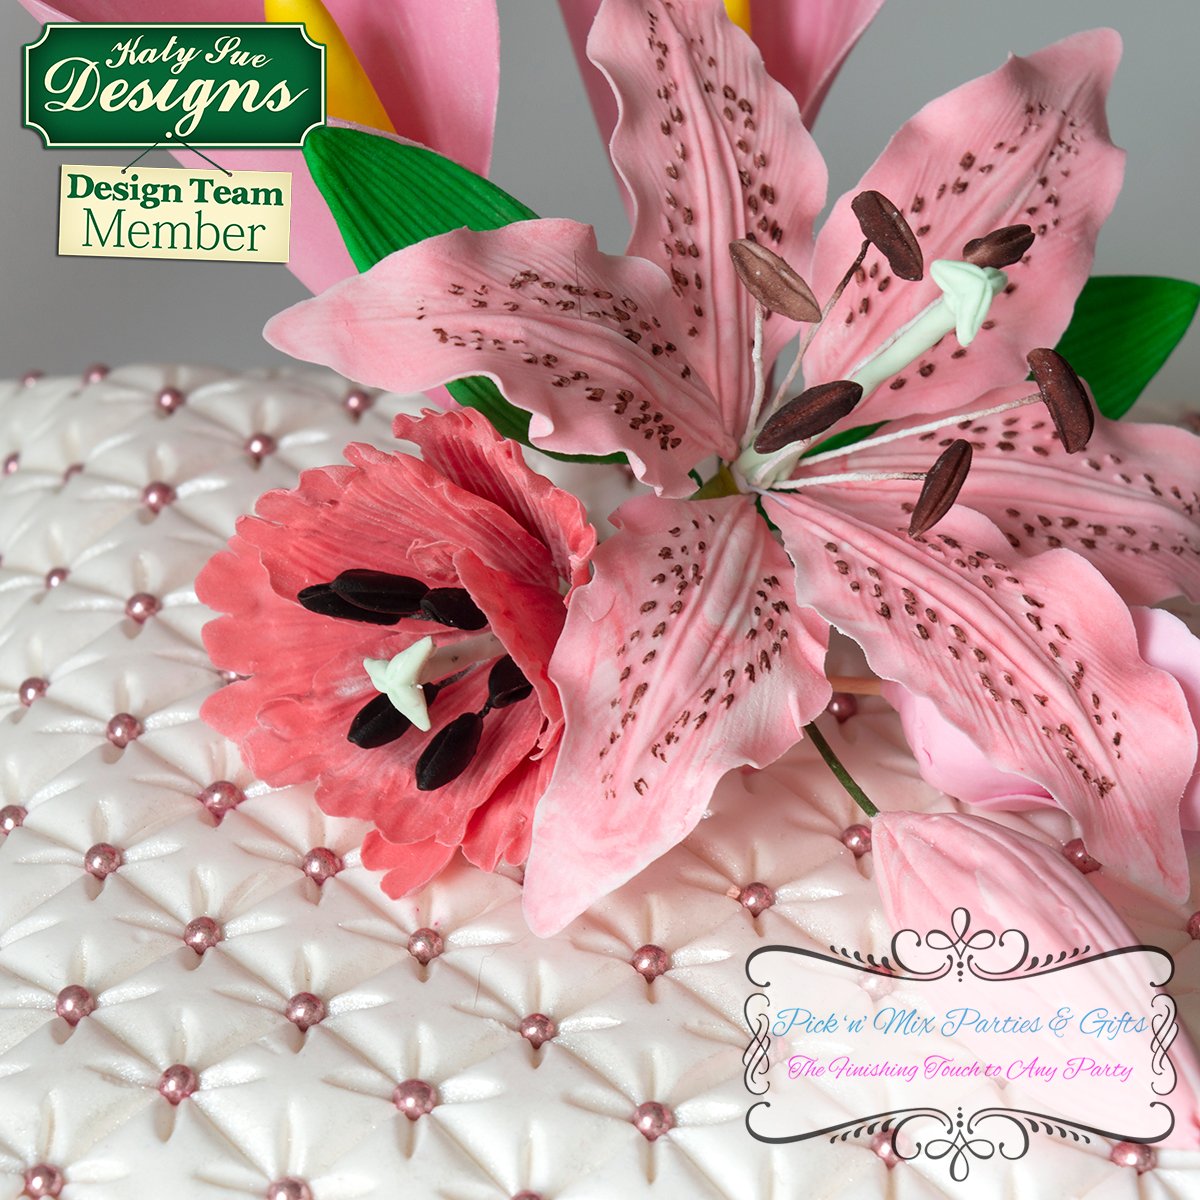 CD - Cake Idea using the Flower Pro Lily Mould and Veiner 